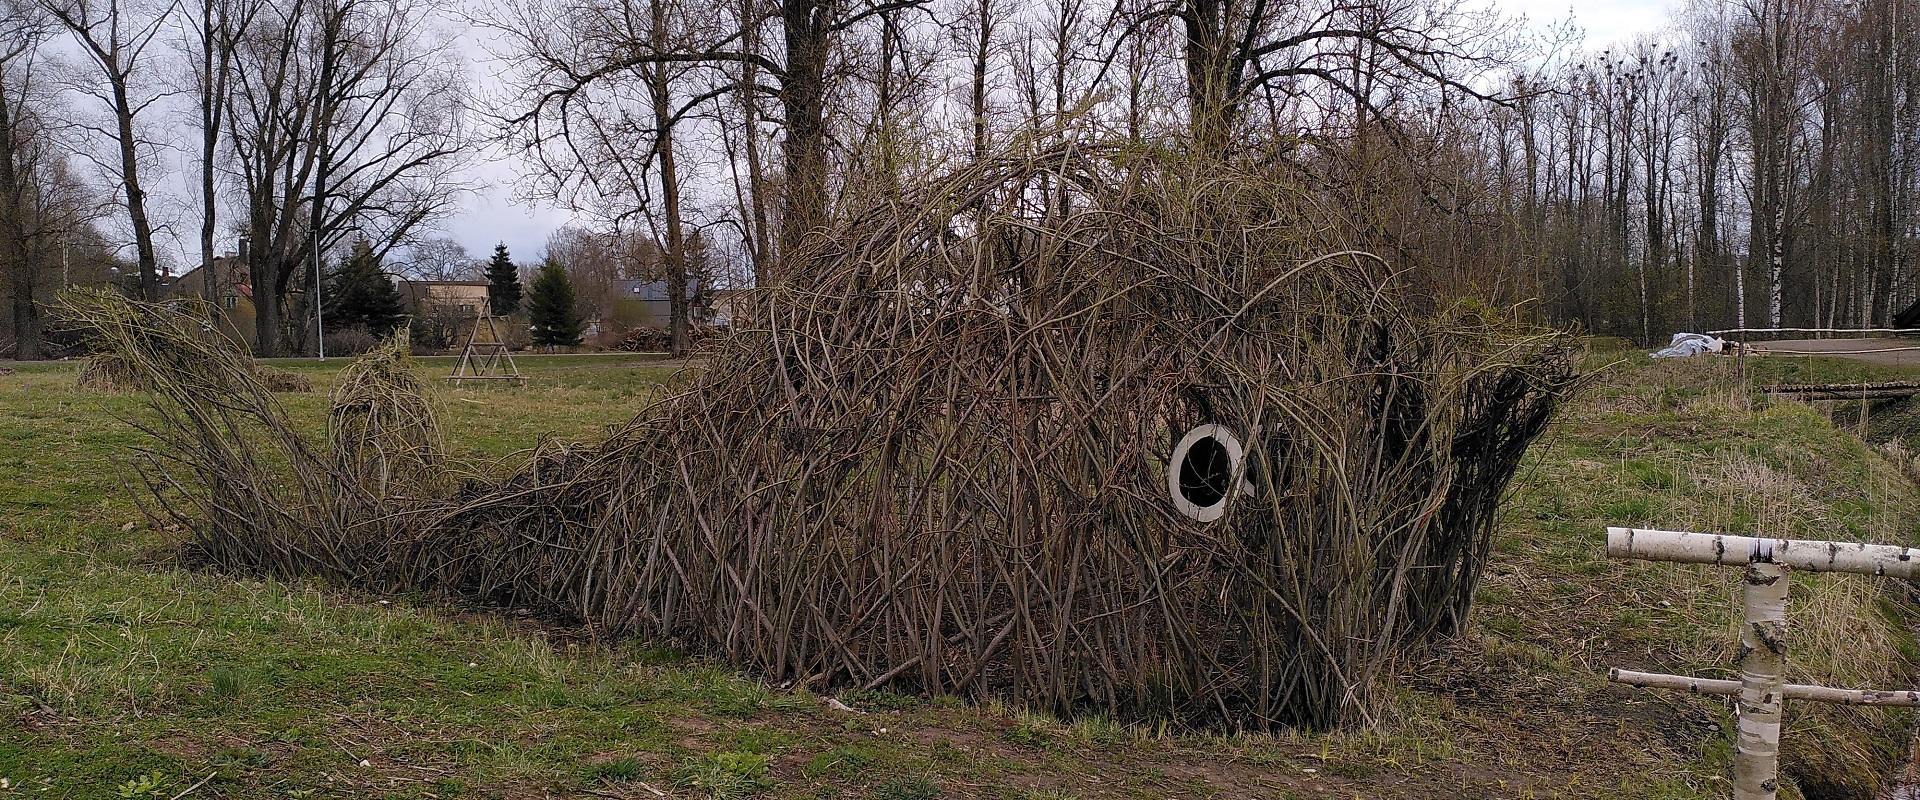 Willow sculpture of a whale in Emajõe Aed